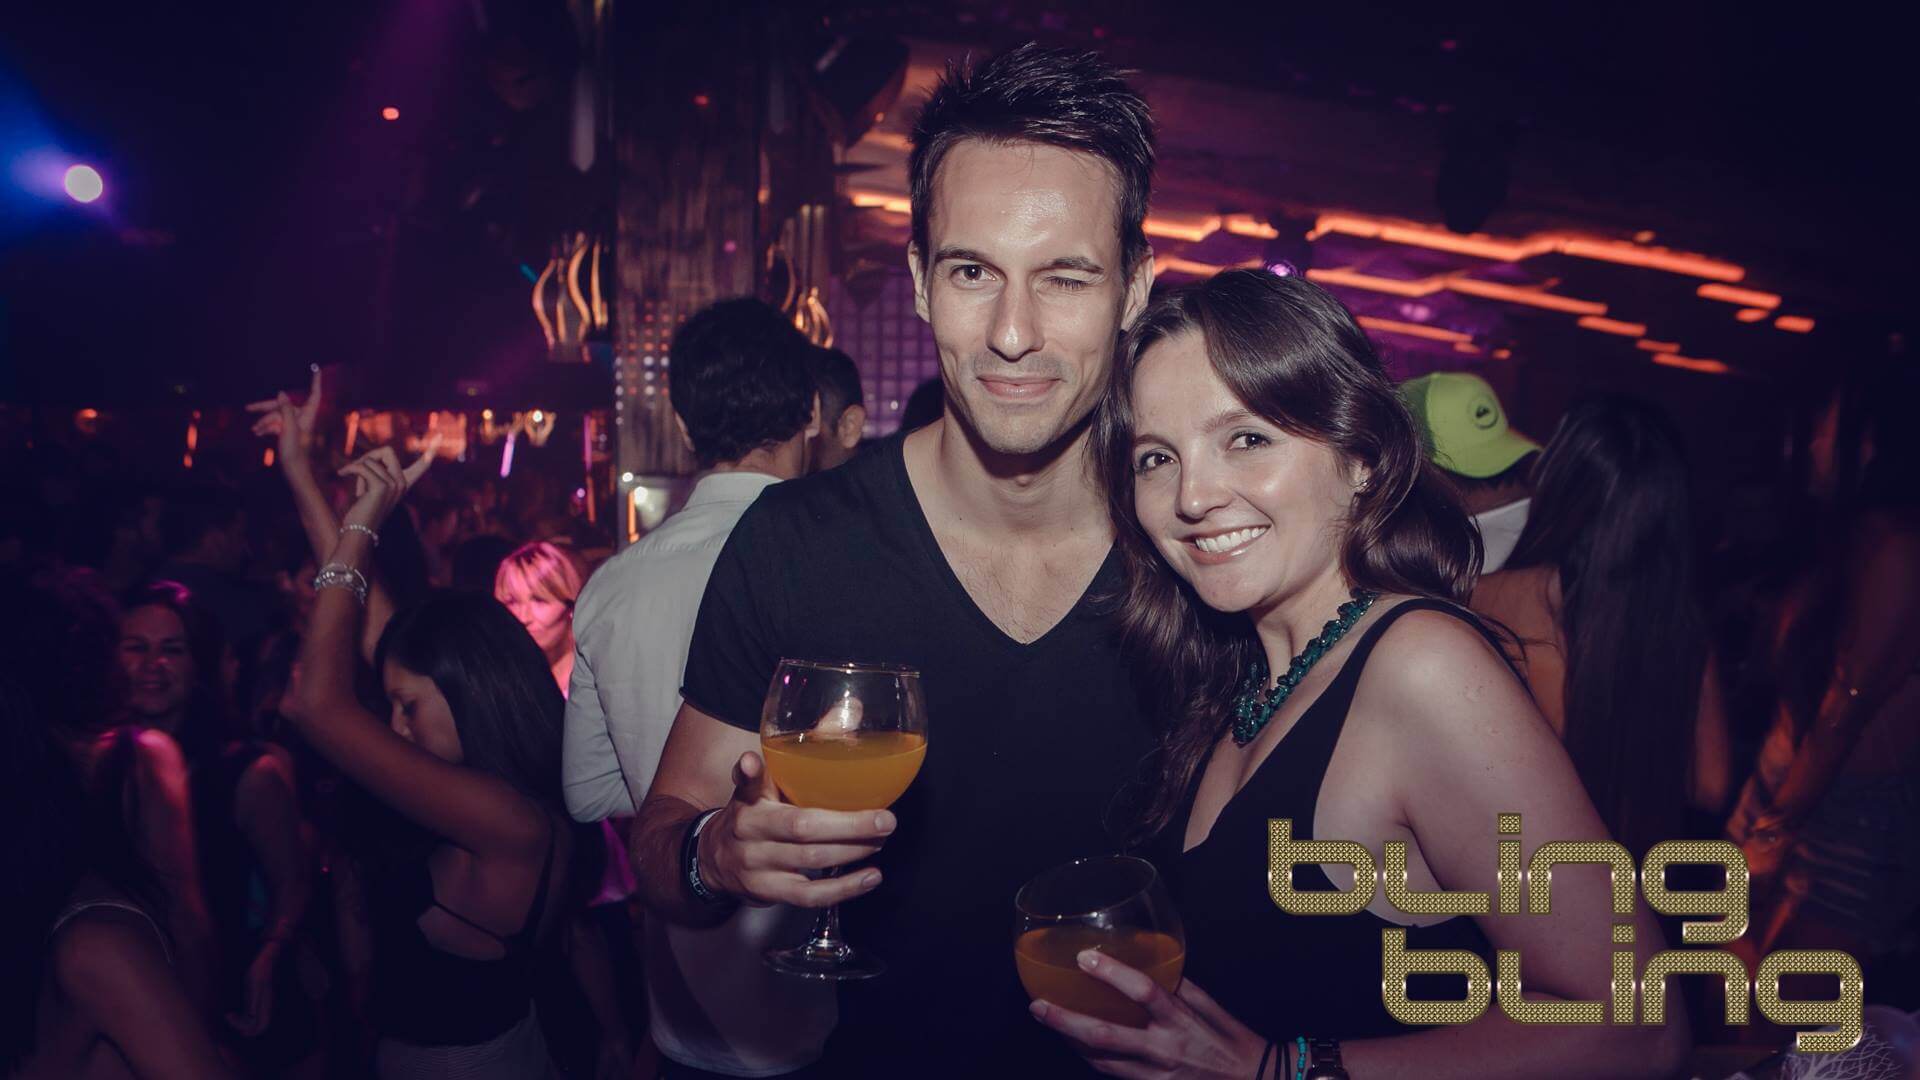 https://images.xceed.me/clubs/gallery/bling-bling-club-barcelona-xceed-9-9721.jpg